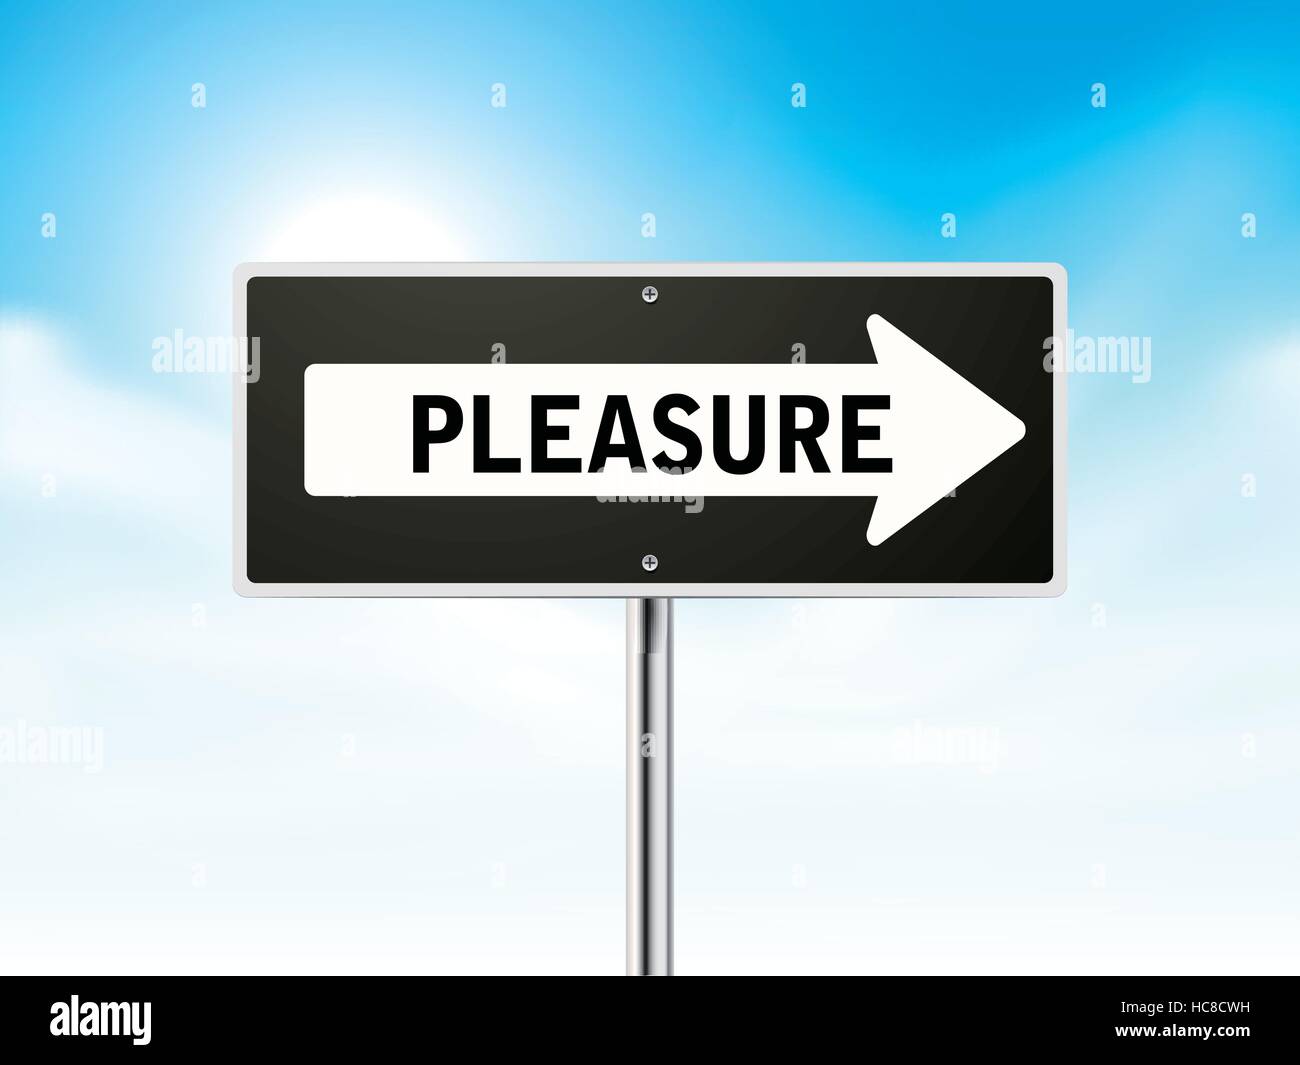 pleasure on black road sign isolated over sky Stock Vector